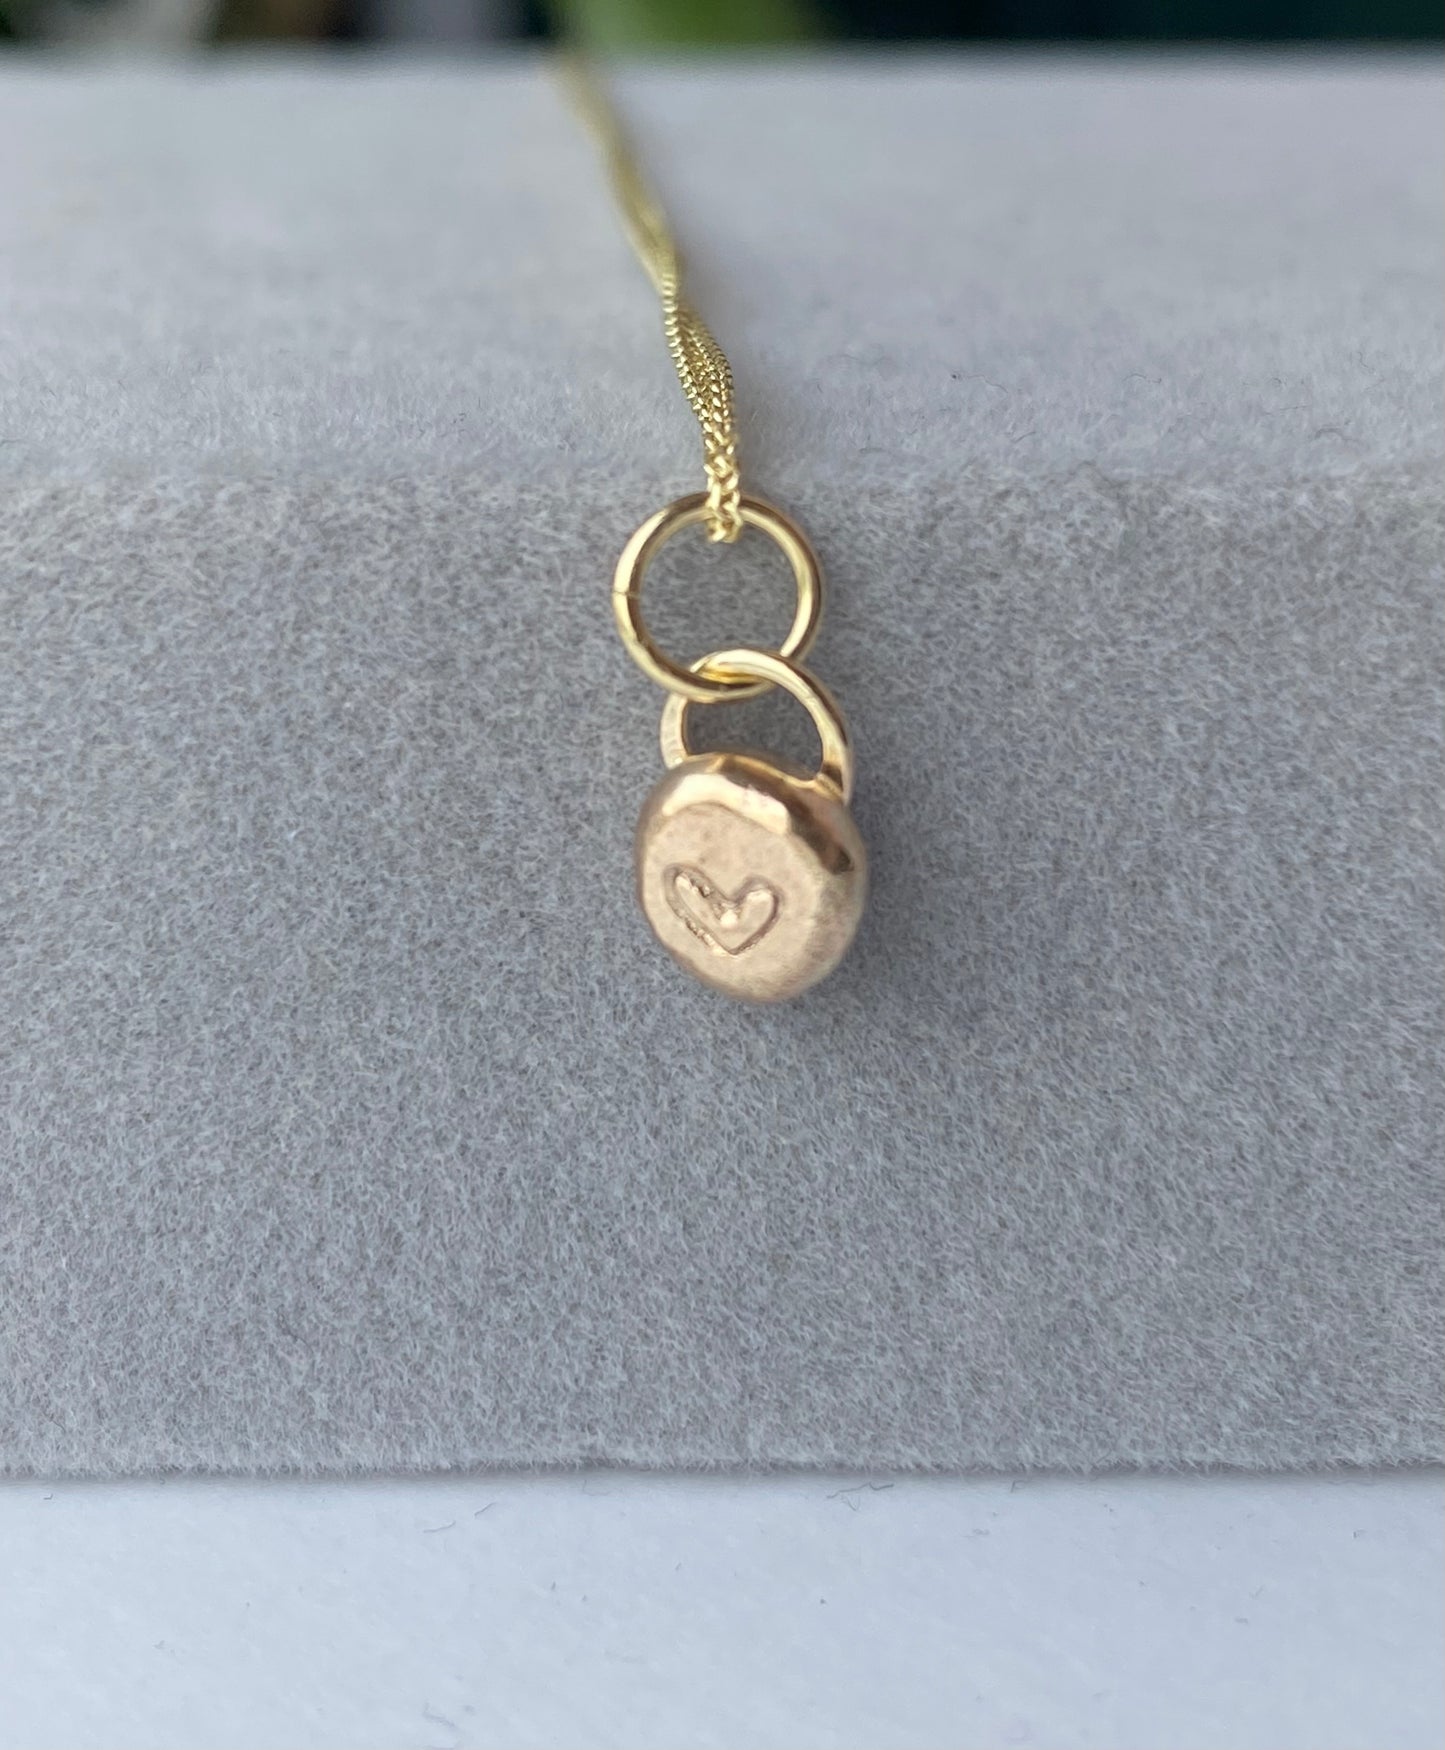 Solid 9ct yellow gold nugget necklace - heart